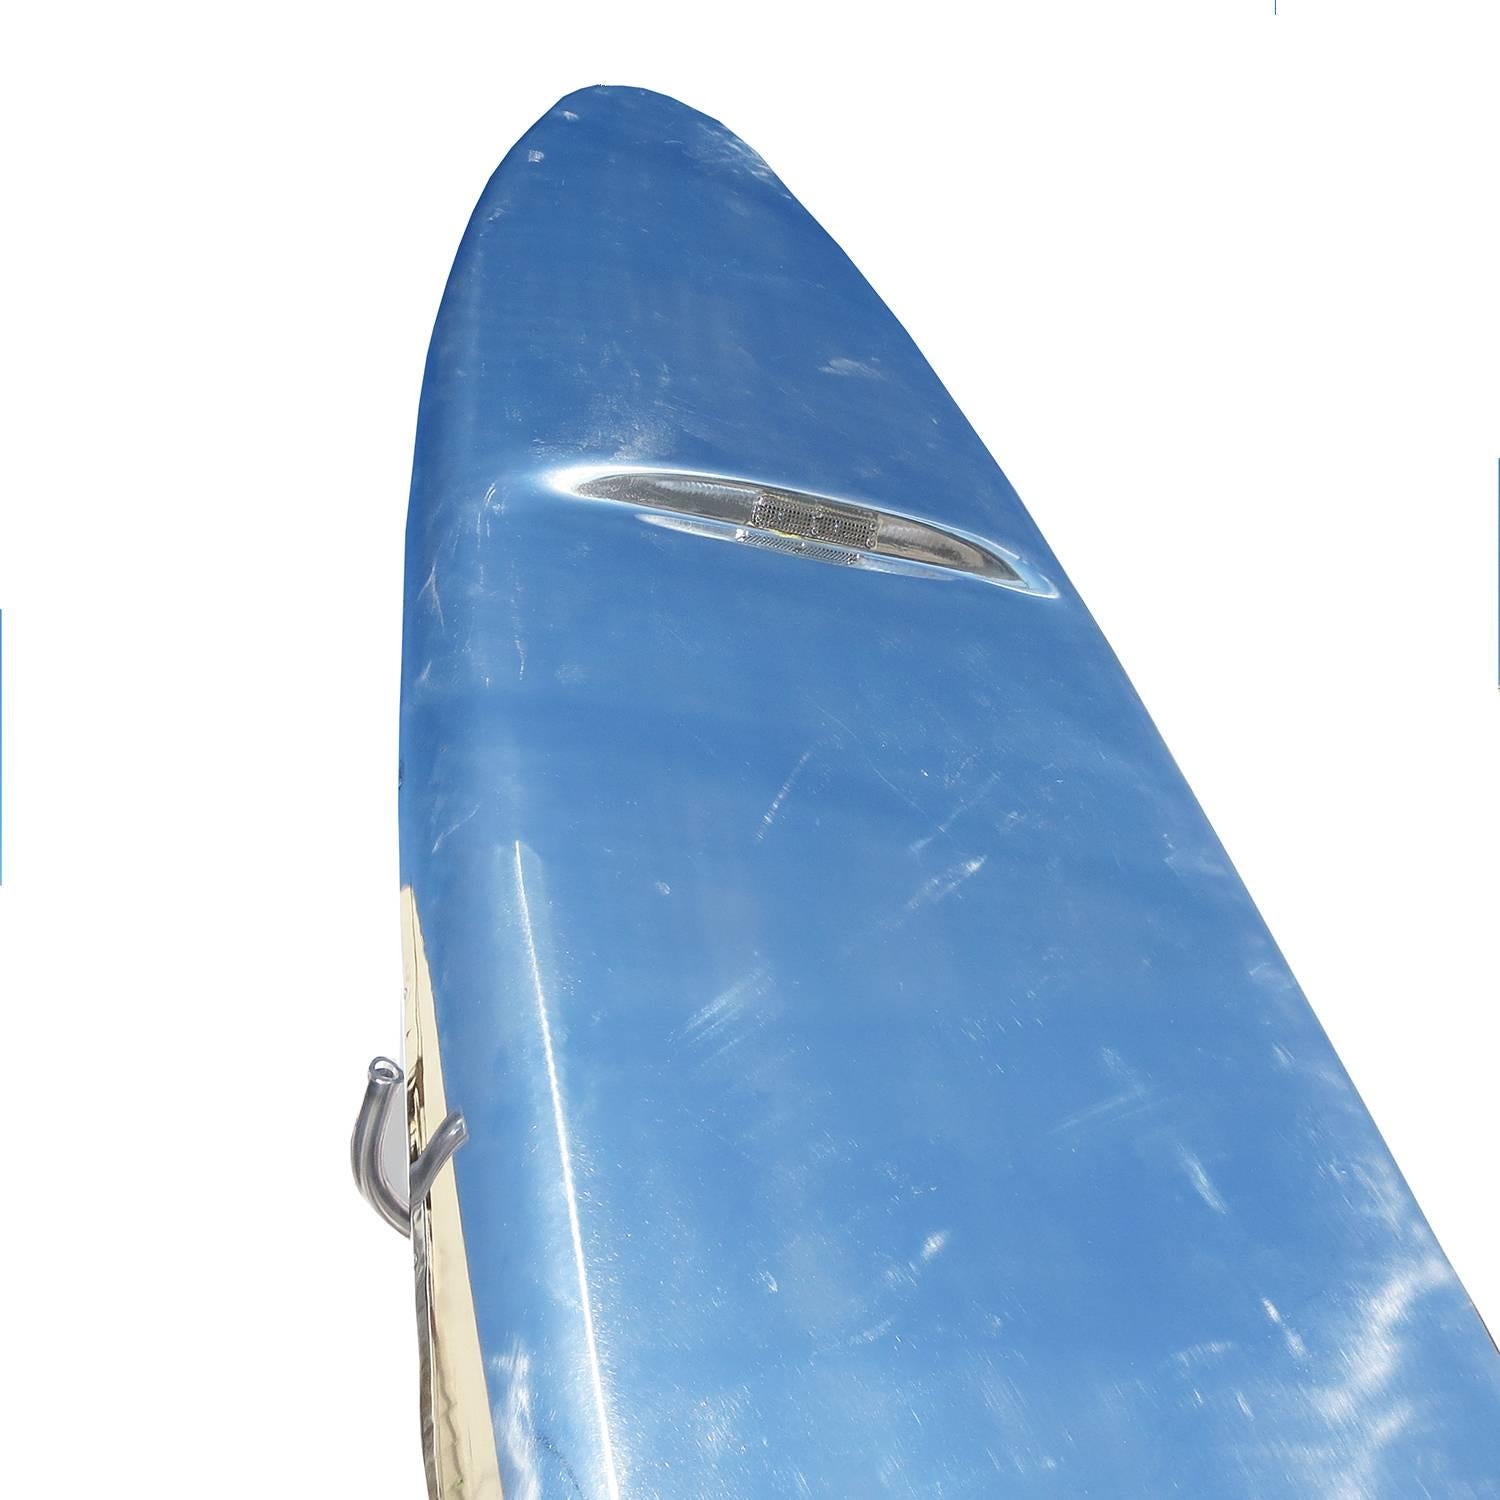 Produced from 1965 to 1968, the jet board was the design of a former Boeing Aviation engineer. The aluminum surfboard is powered by a 6.25 horsepower Tecumseh engine and jet propulsion system. Air is vented through the front of the board and